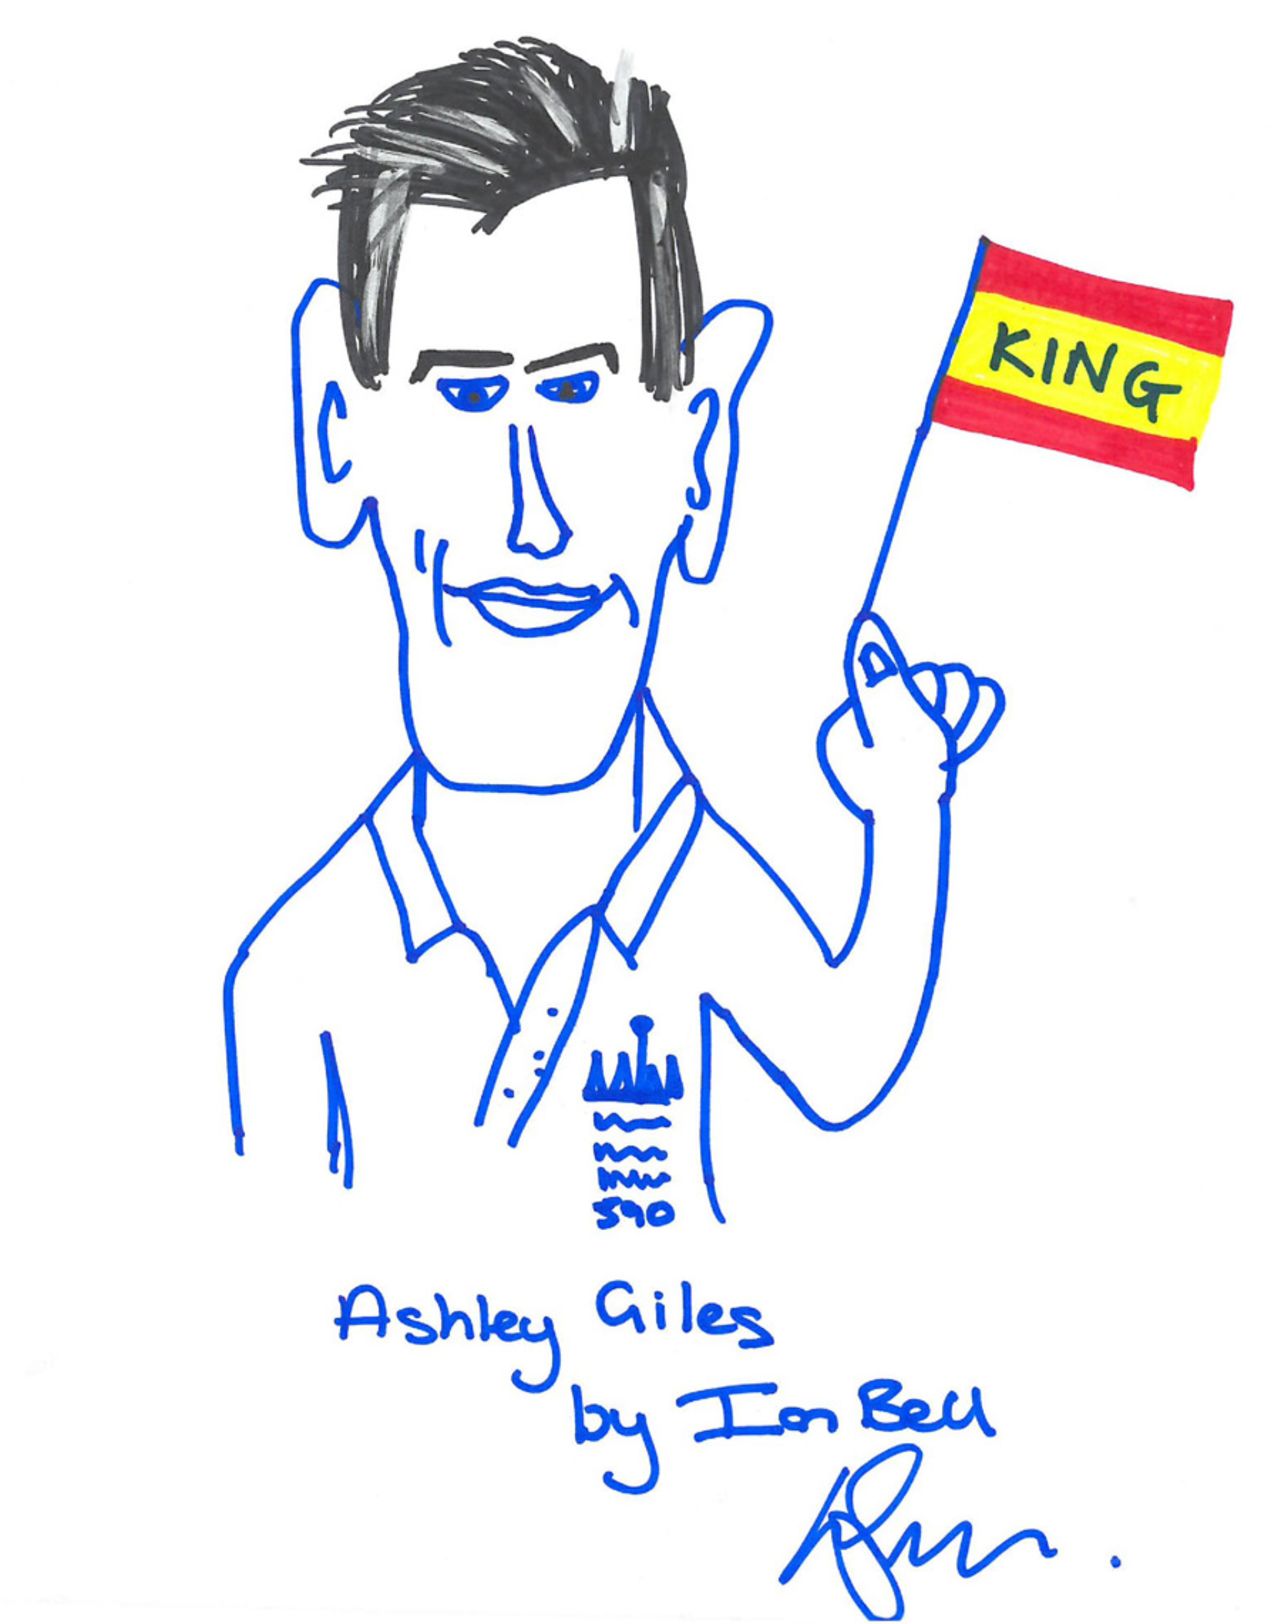 Ian Bell sketches the king of Spain